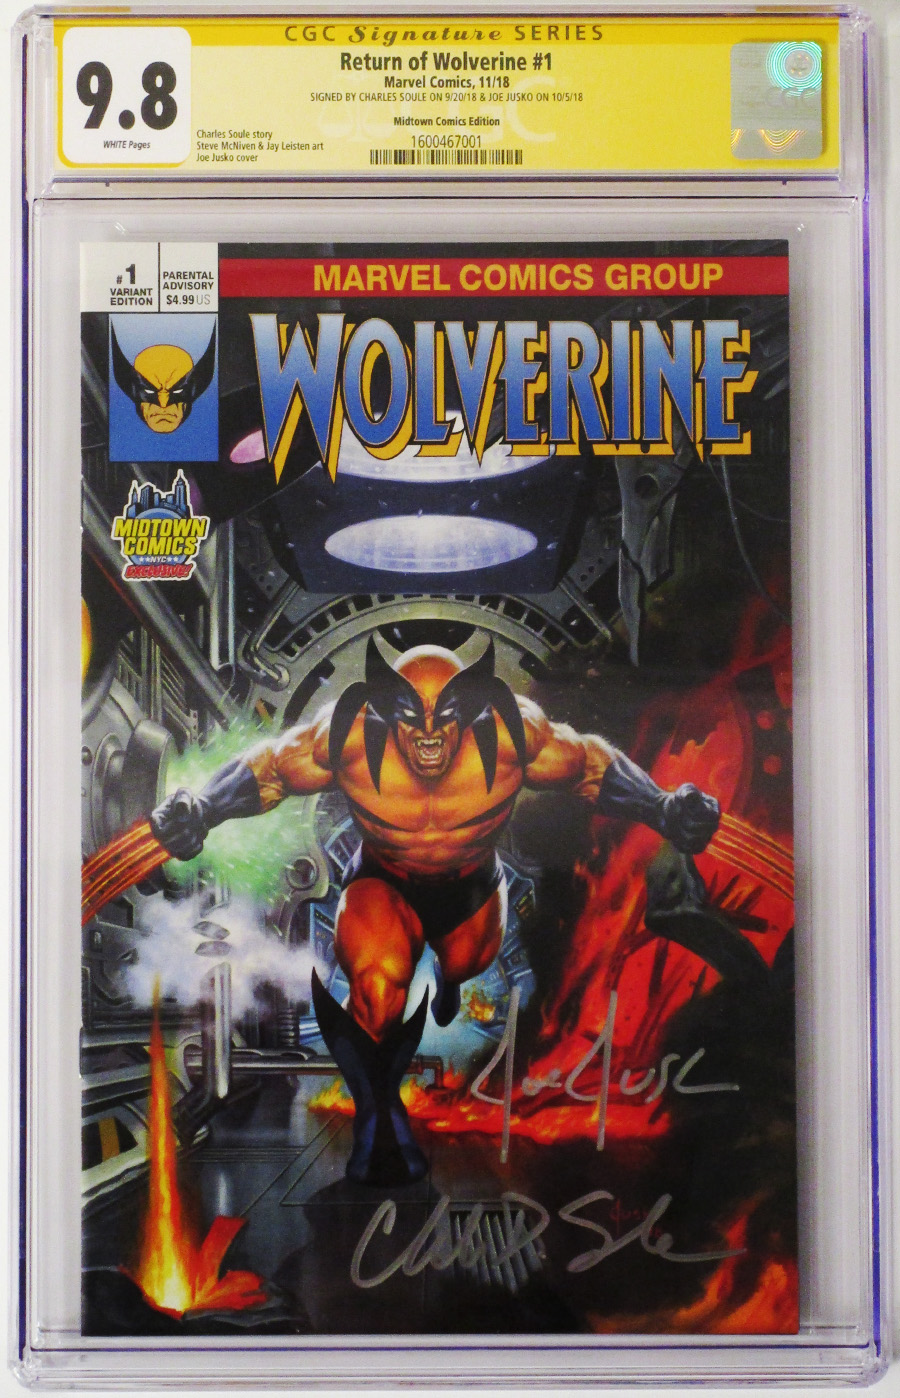 Return Of Wolverine #1  Midtown Exclusive Cover F CGC Signature Series 9.8 Signed by Charles Soule and Joe Jusko Joe Jusko Variant Cover 